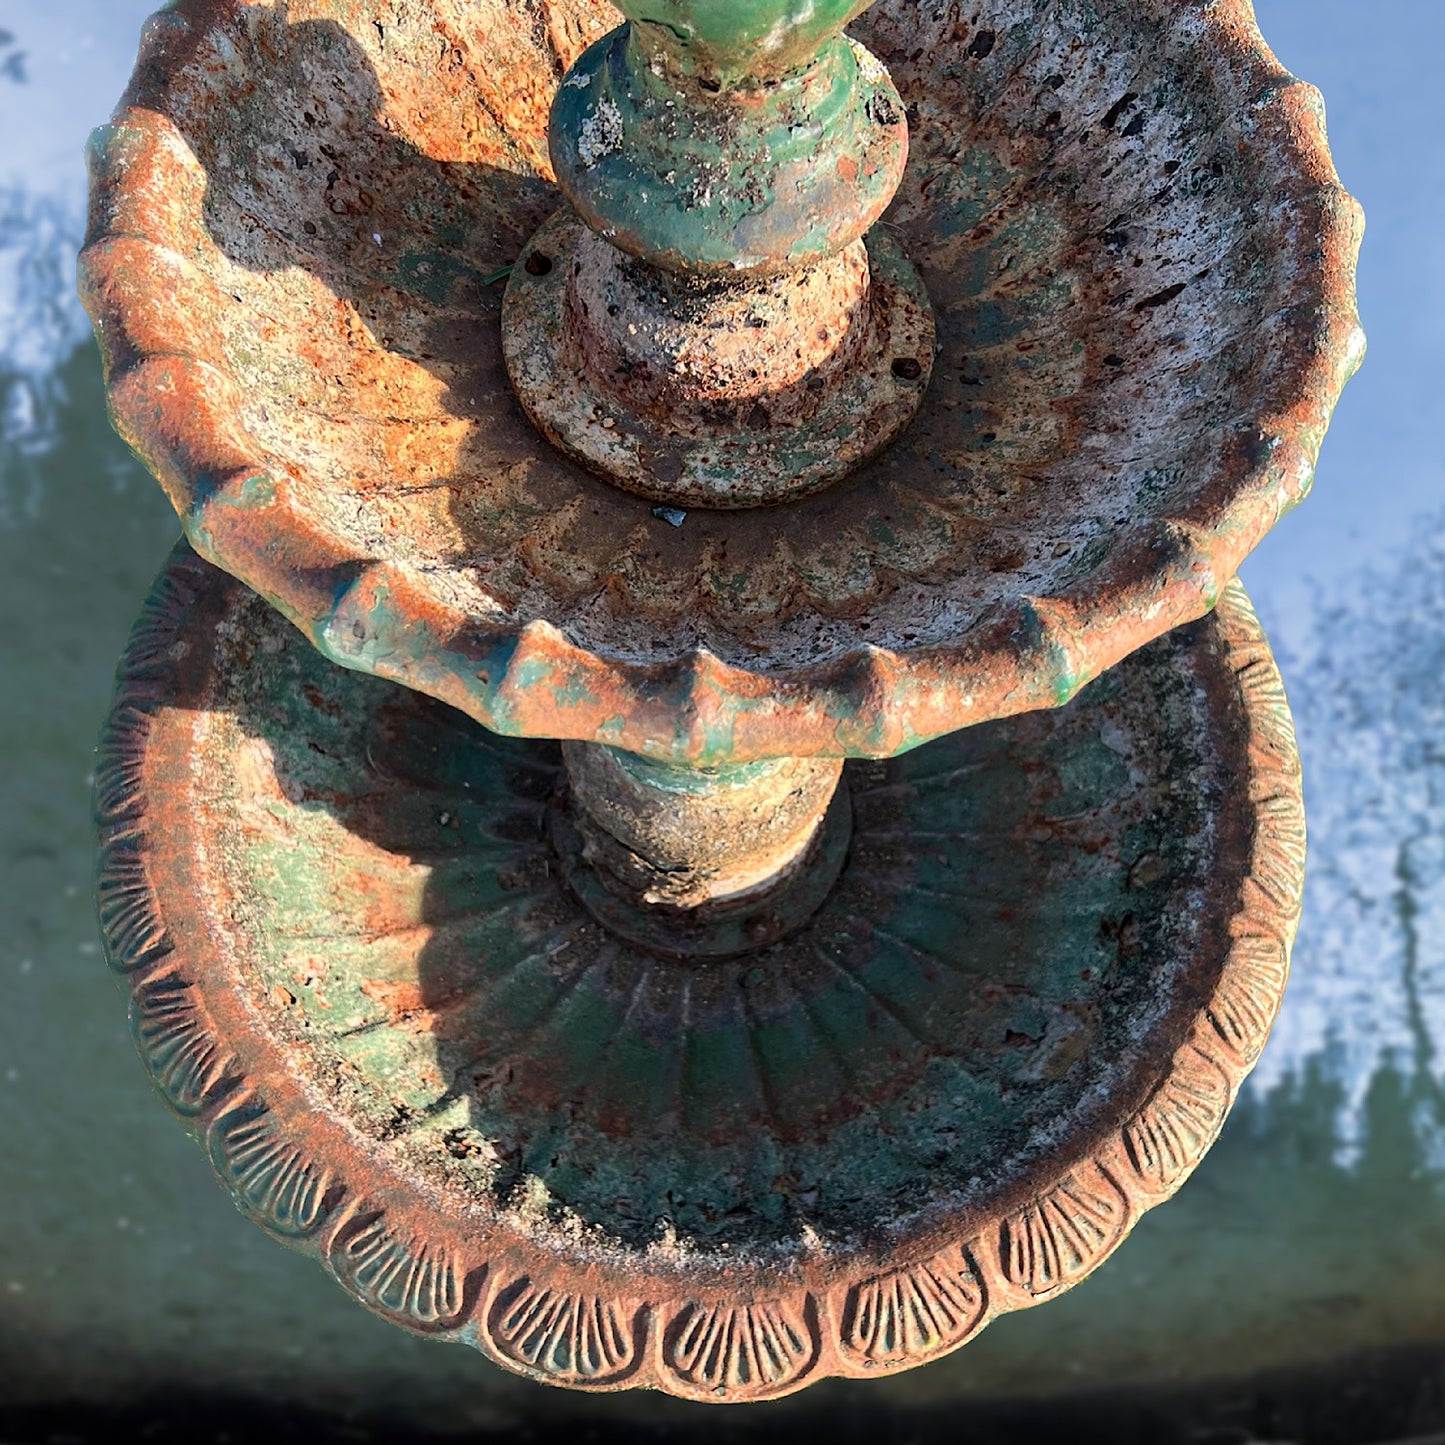 Two-Tiered French Cast Iron Fountain